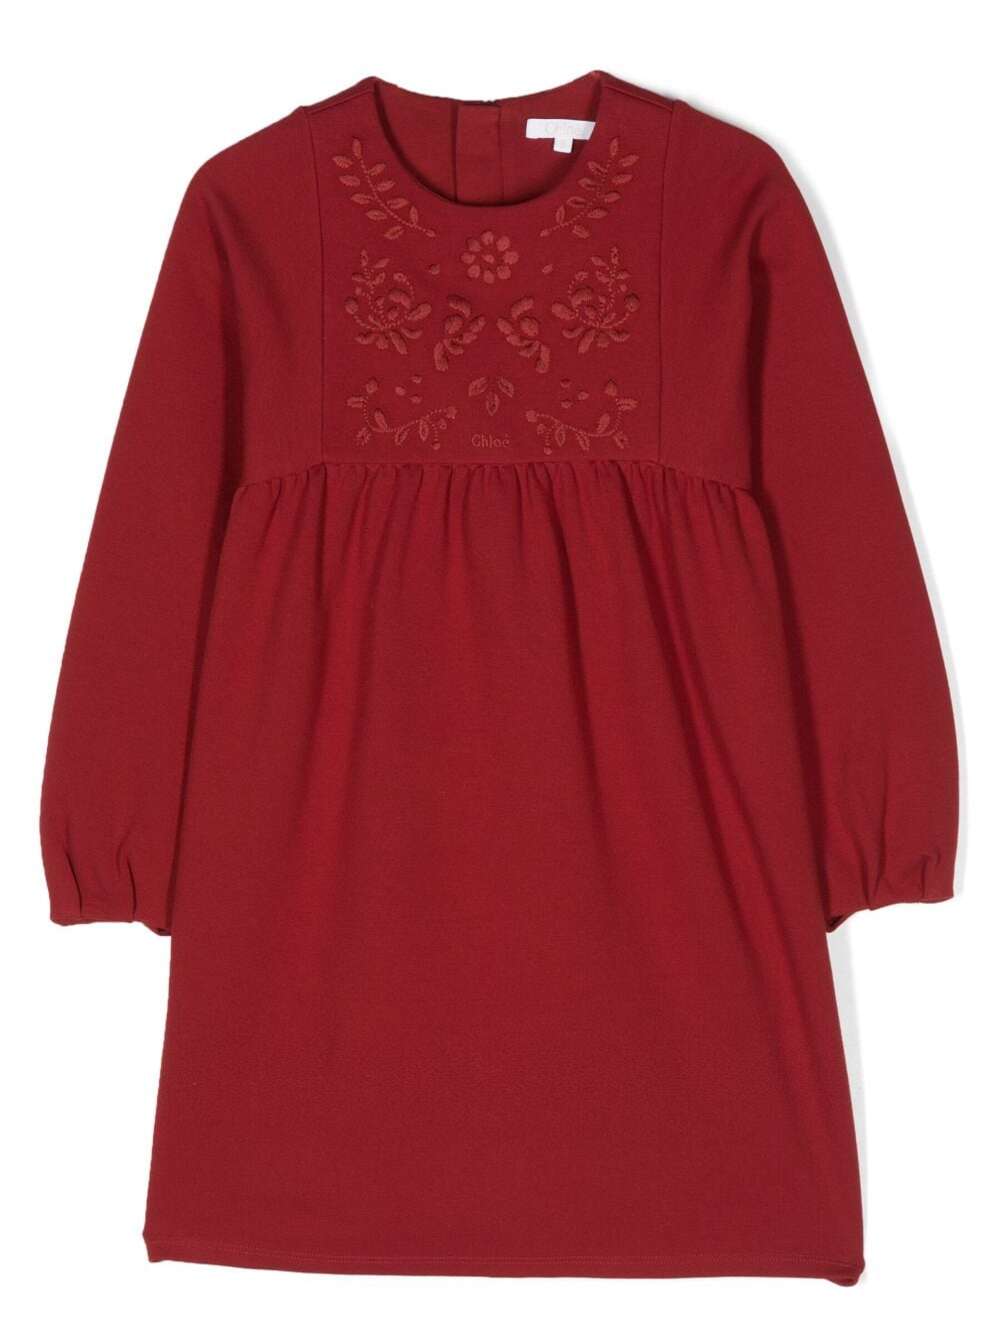 CHLOÉ RED DRESS WITH TONAL FLOREAL EMBROIDERY IN COTTON BLEND GIRL